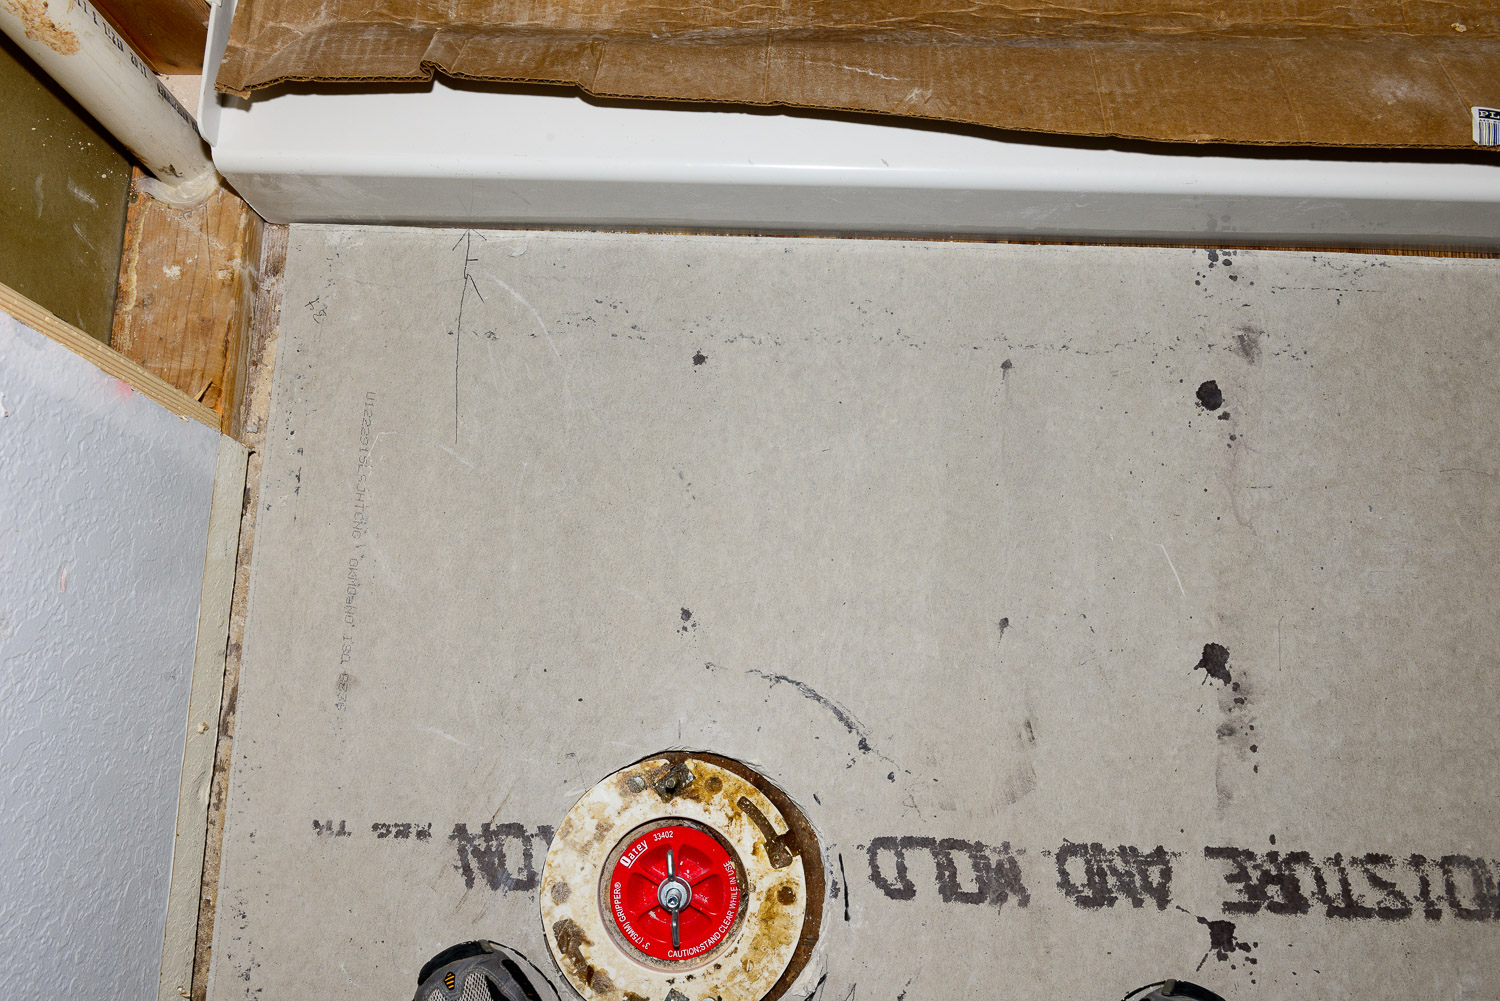 You want to make sure you leave around 1/8" `space for caulk between the underlayment board and the shower base.